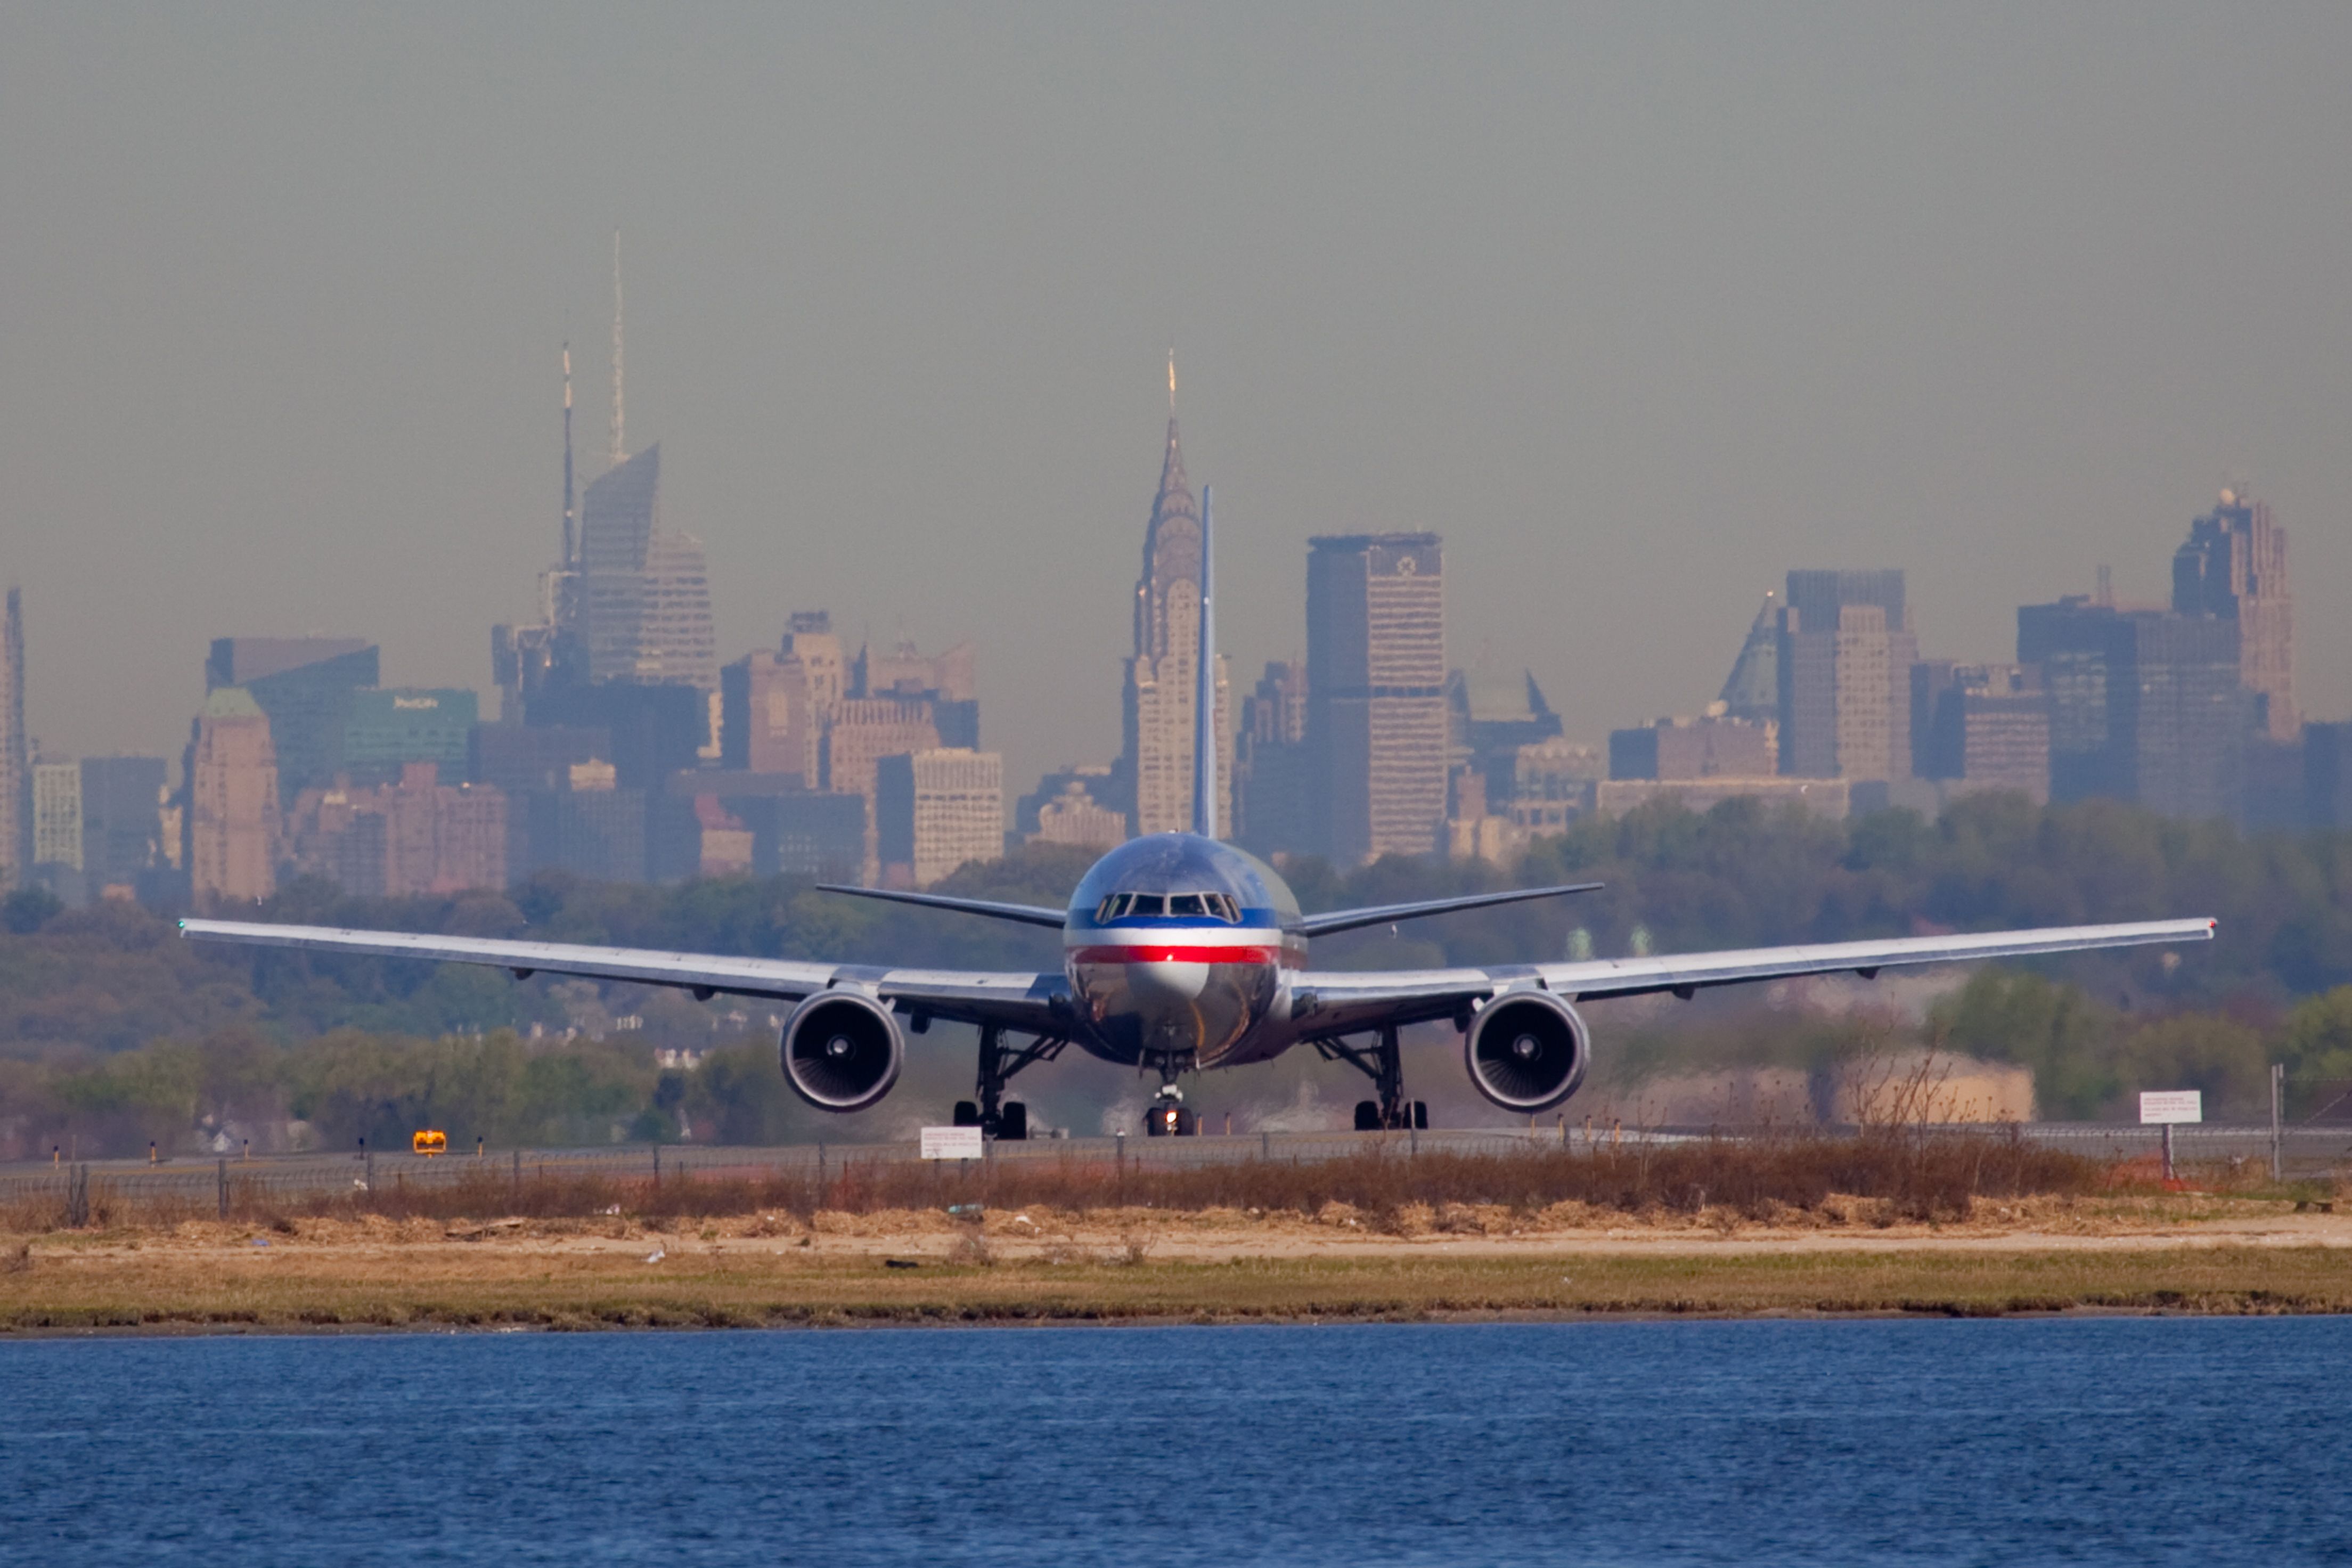 An American Airlines Boeing 767 Lining up on JFK Runway in New York, USA